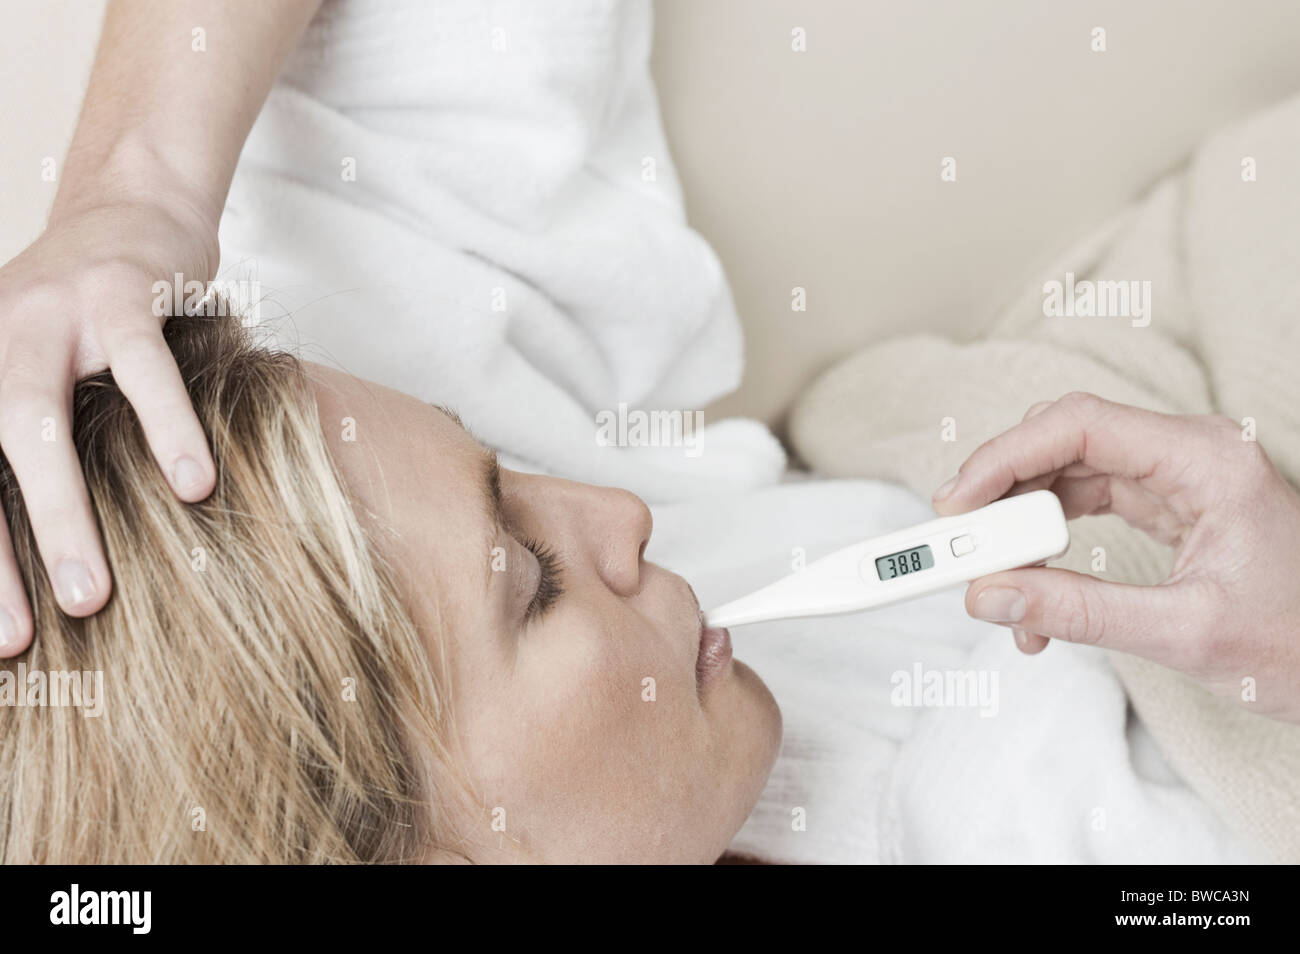 South Africa, Cape Town, Profile of sick young woman with thermometer in mouth Stock Photo